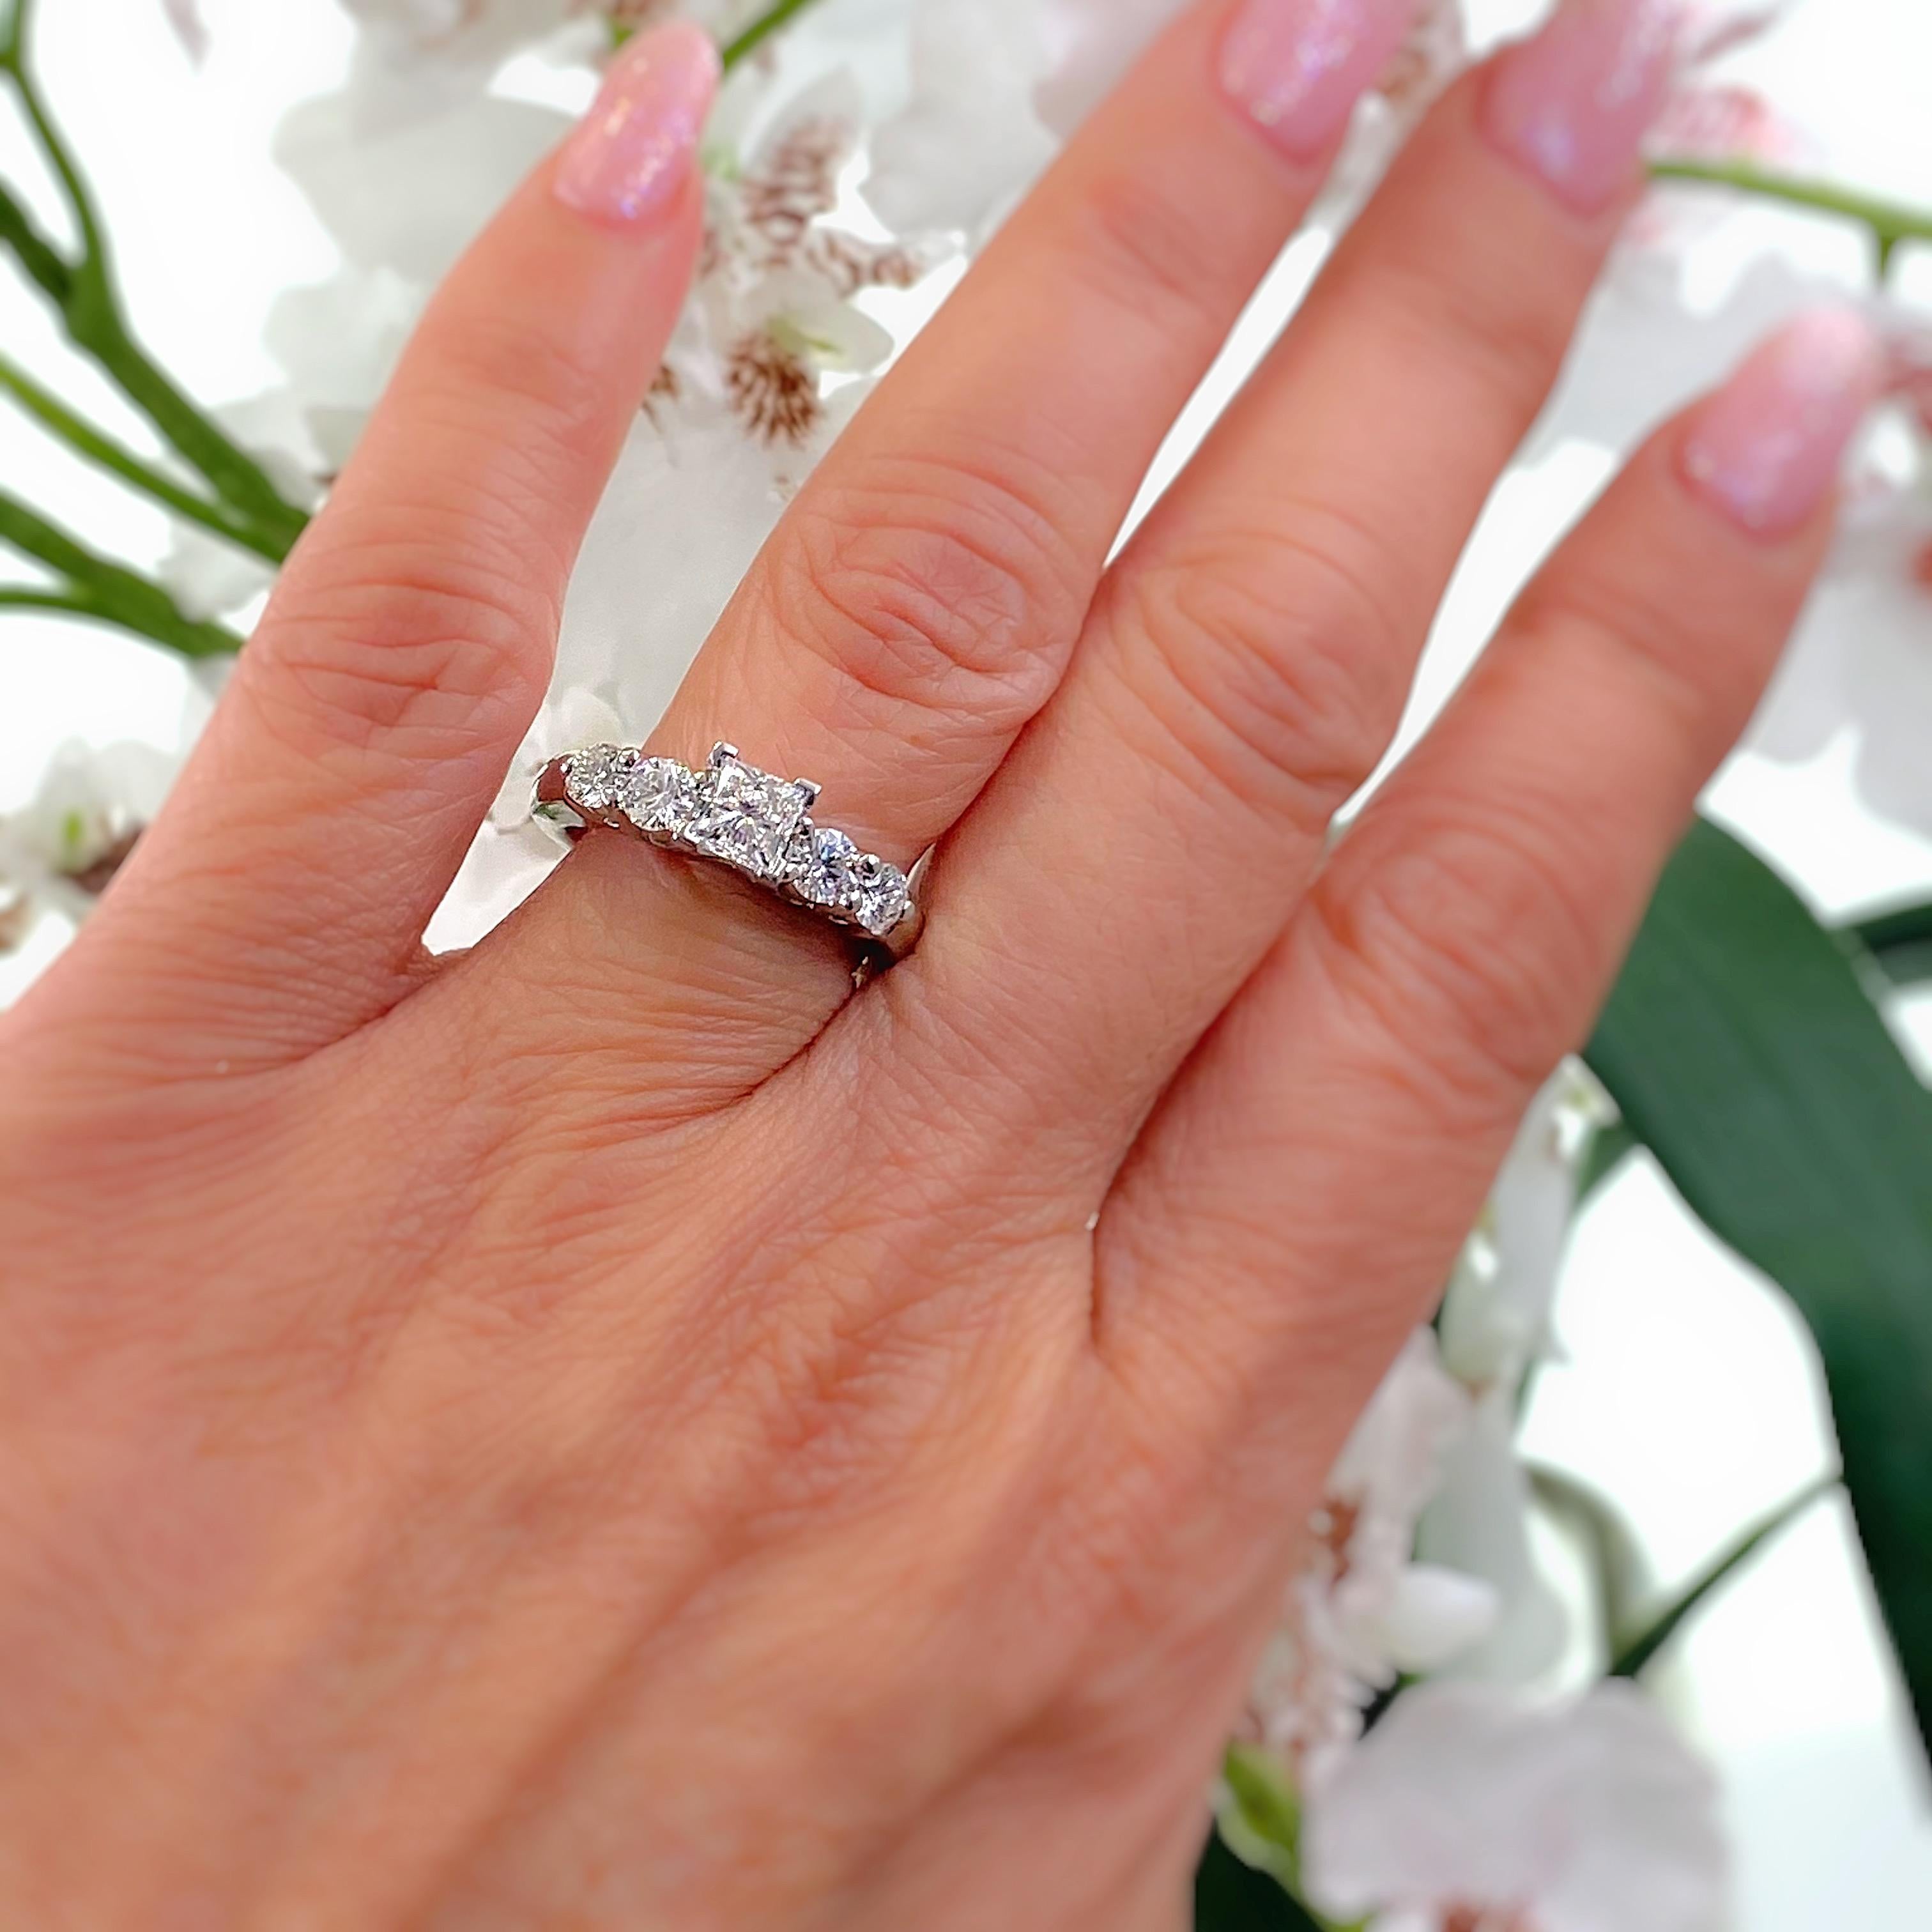 Blue Nile Diamond Engagement Ring
Style:  Solitaire with Accents
AGS Diamond Grading Report:  #7438305
Metal:  Platinum
Size:  6.5 - sizable
TCW:  1.36 tcw
Main Diamond:  Princess Diamond 0.70 cts
Color & Clarity:  G - VS1
Accent Diamonds:  4 Round